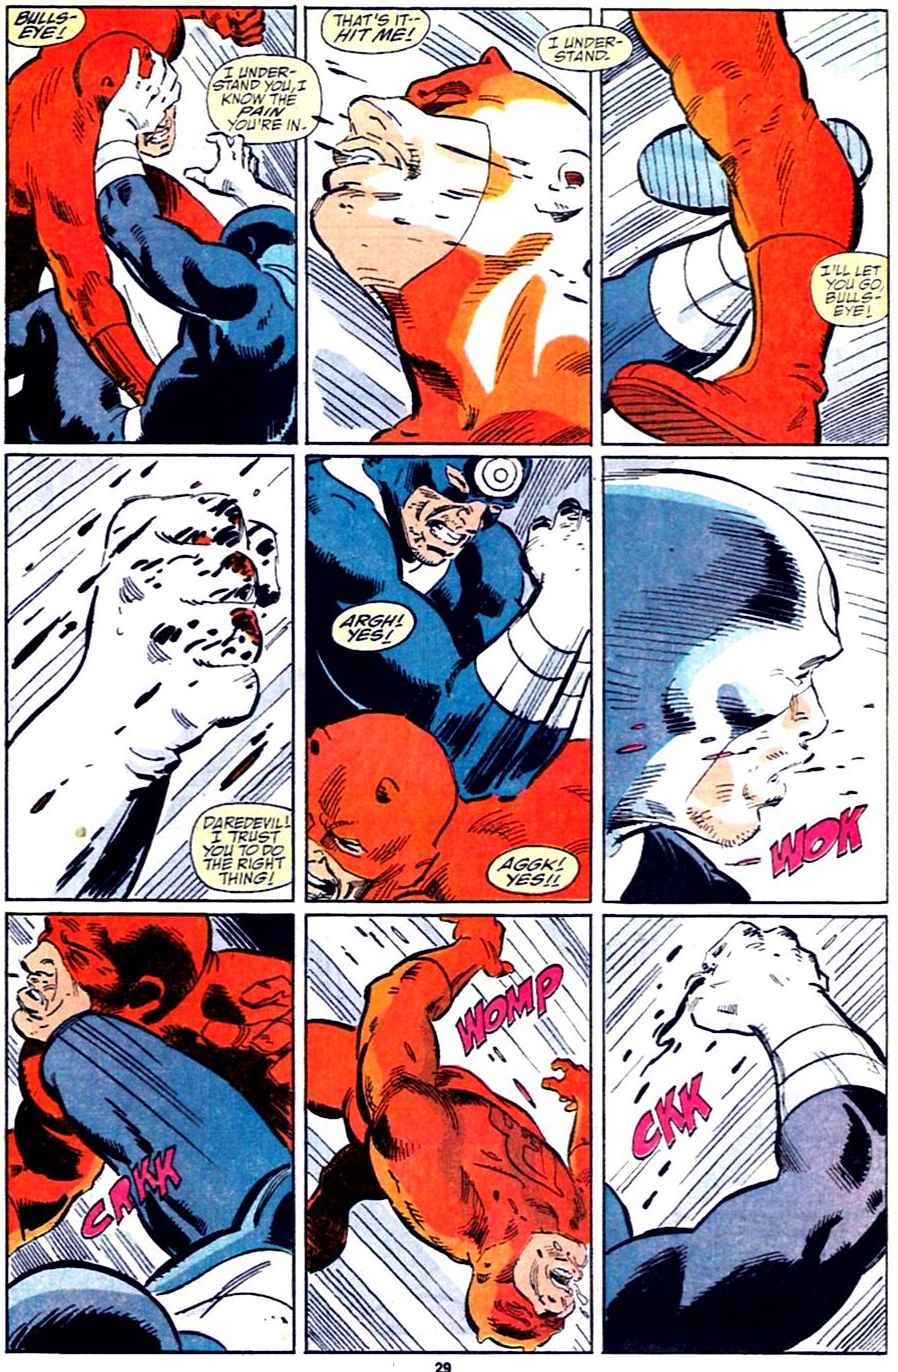 A confused and identity-swapped Matt Murdock takes on the likewise Benjamin Poindexter in Daredevil Vol. 1 #290 "Bullseye!" (1991), Marvel Comics. Words by Ann Nocenti, art by Kieron Dwyer, Fred Fredricks, and Steve Buccellato.